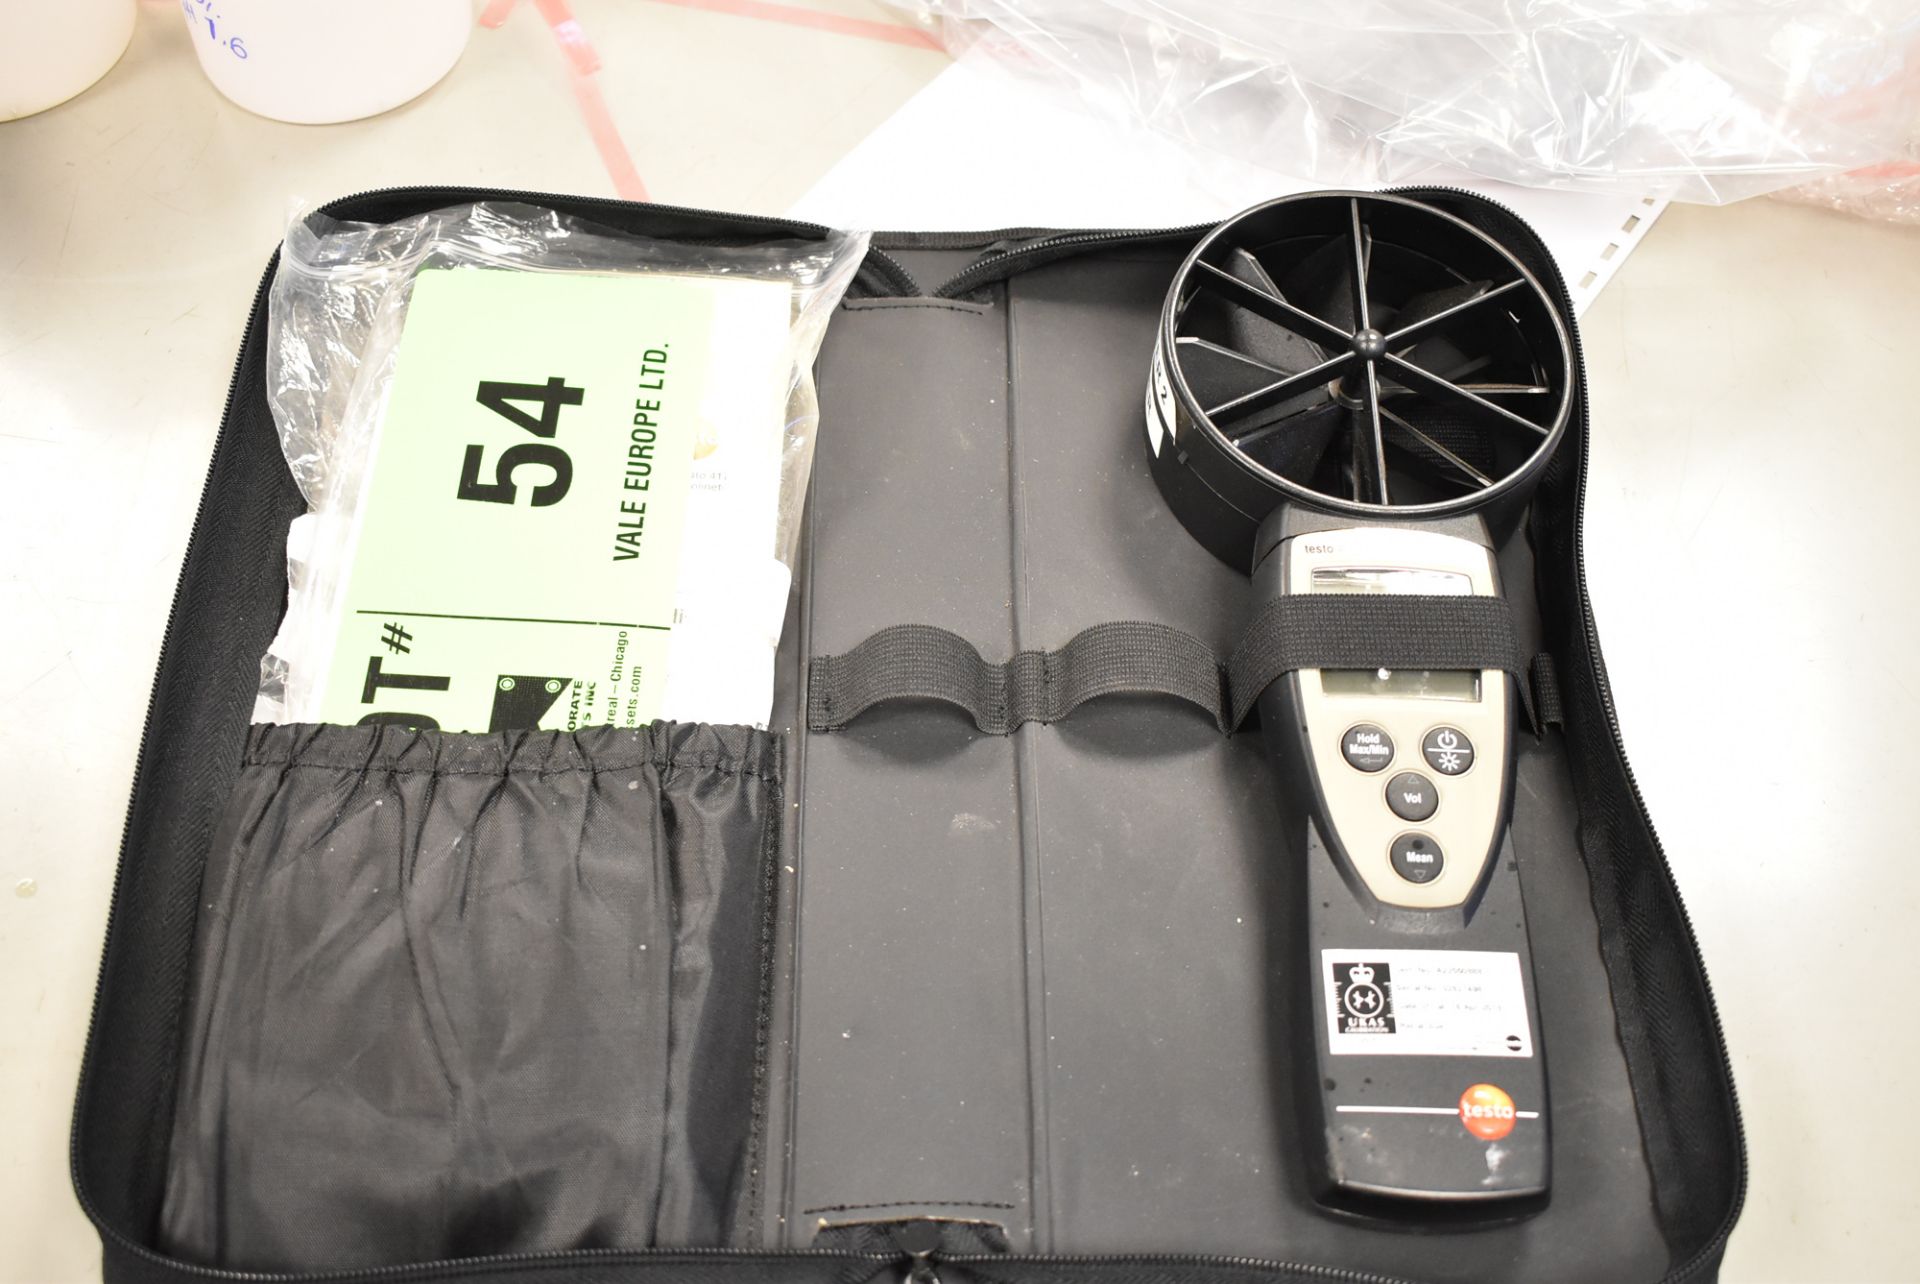 TESTO 417 DIGITAL ANEMOMETER (ROOM 264) [RIGGING FEES FOR LOT #54 - £25 PLUS APPLICABLE TAXES]